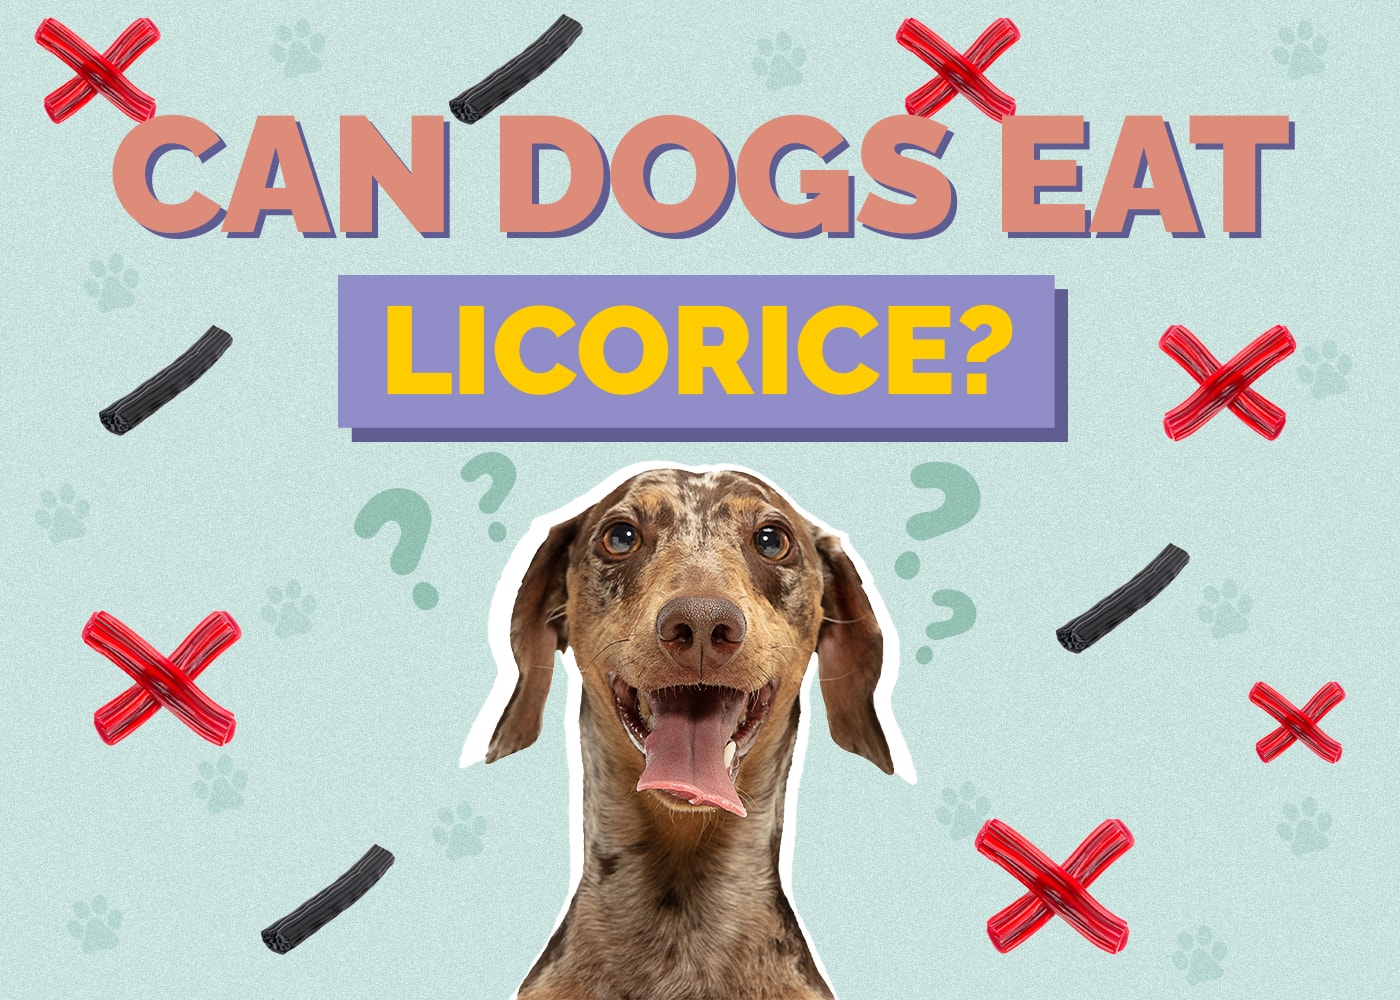 Can Dogs Eat licorice